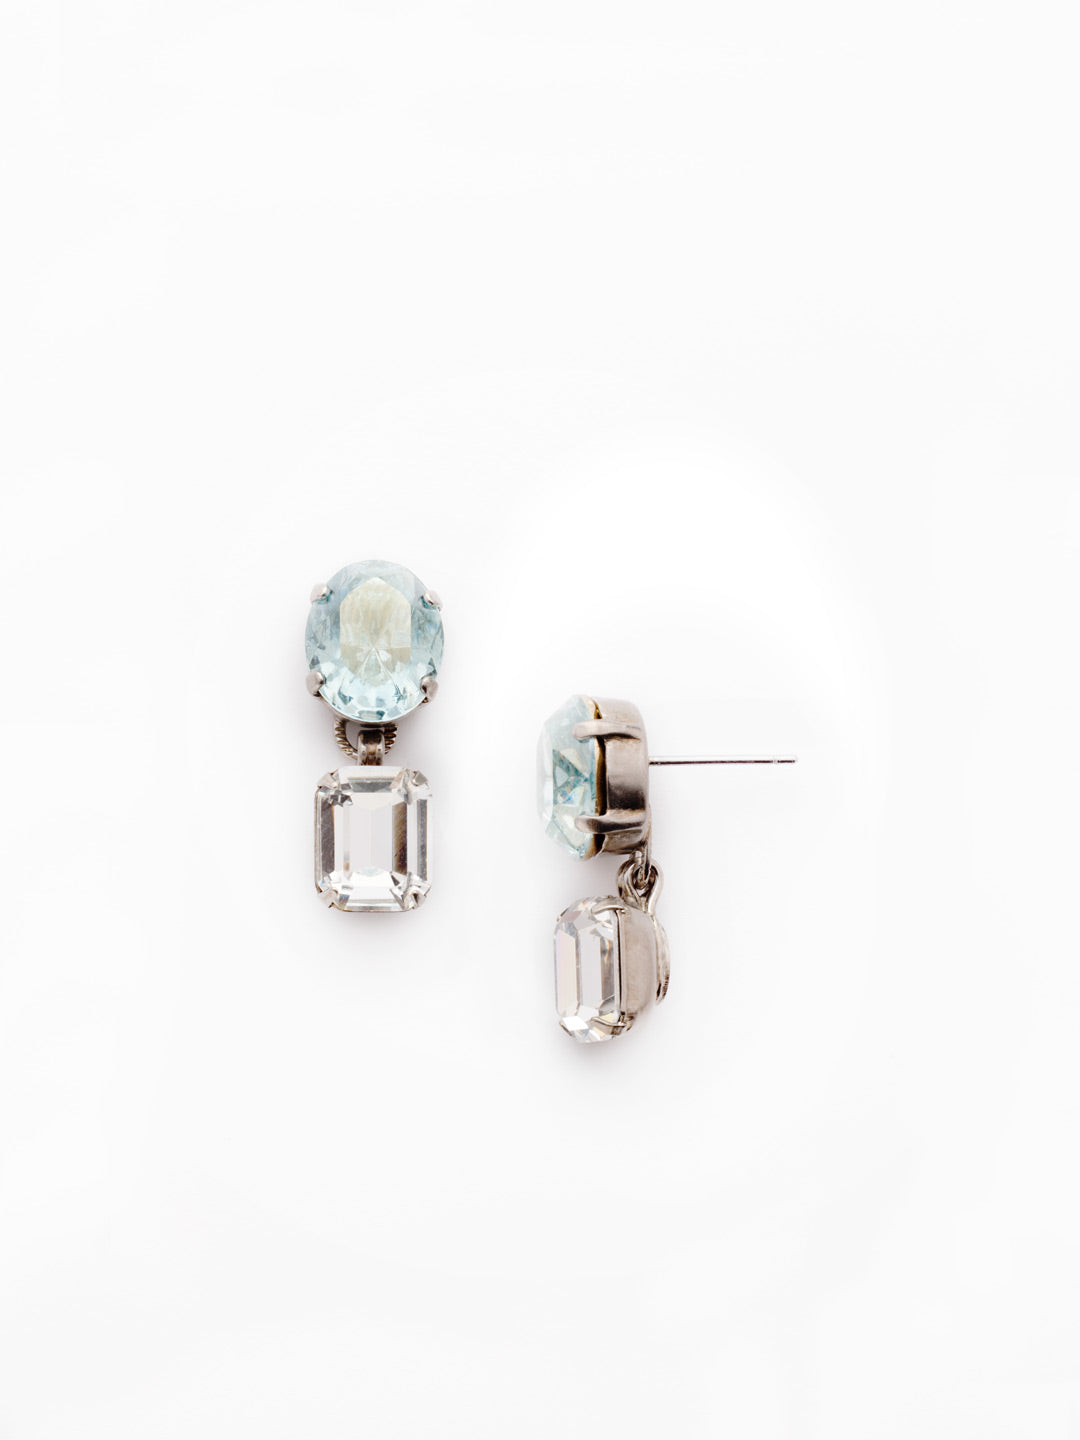 Ansley Dangle Earrings - EET18ASCAZ - <p>The Ansley Dangle Earrings feature a sparkling oval crystal with a dangling opaque circular stone. It's a pretty pair. From Sorrelli's Crystal Azure collection in our Antique Silver-tone finish.</p>